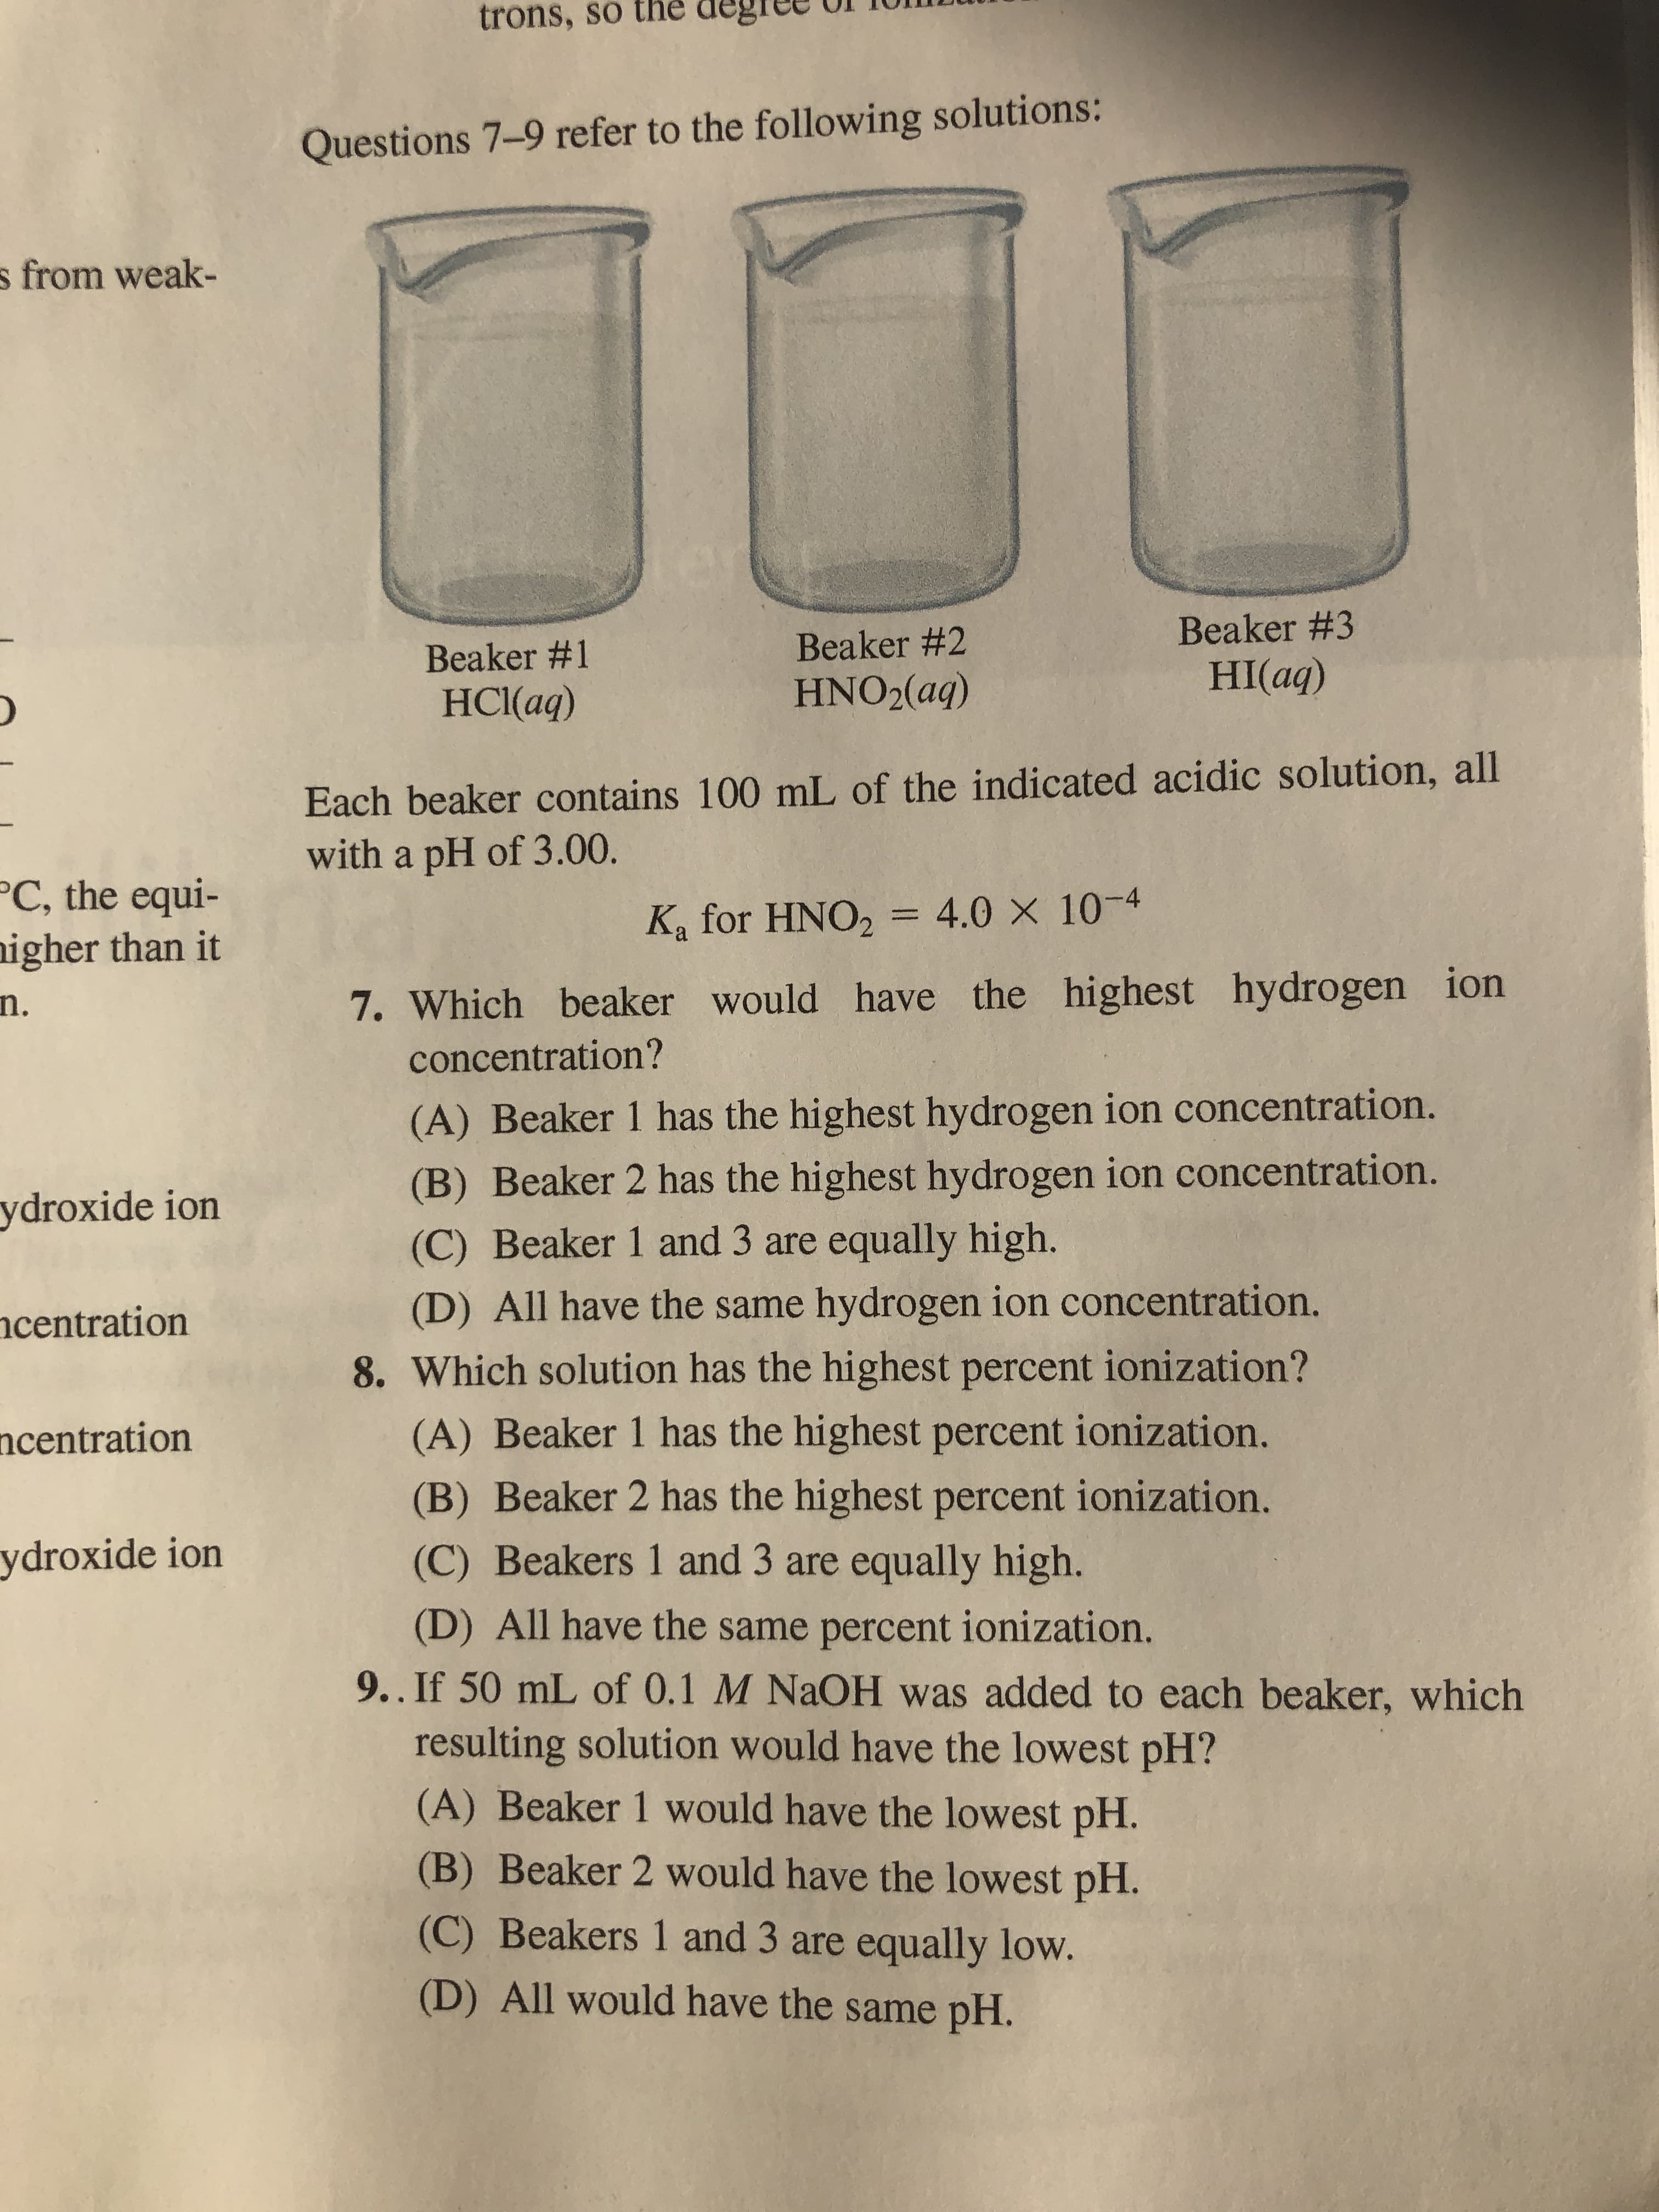 If 50 mL of 0.1 M NAOH was added to each beaker, which
resulting solution would have the lowest pH?
(A) Beaker 1 would have the lowest pH.
(B) Beaker 2 would have the lowest pH.
(C) Beakers 1 and 3 are equally low.
(D) All would have the same pH.
